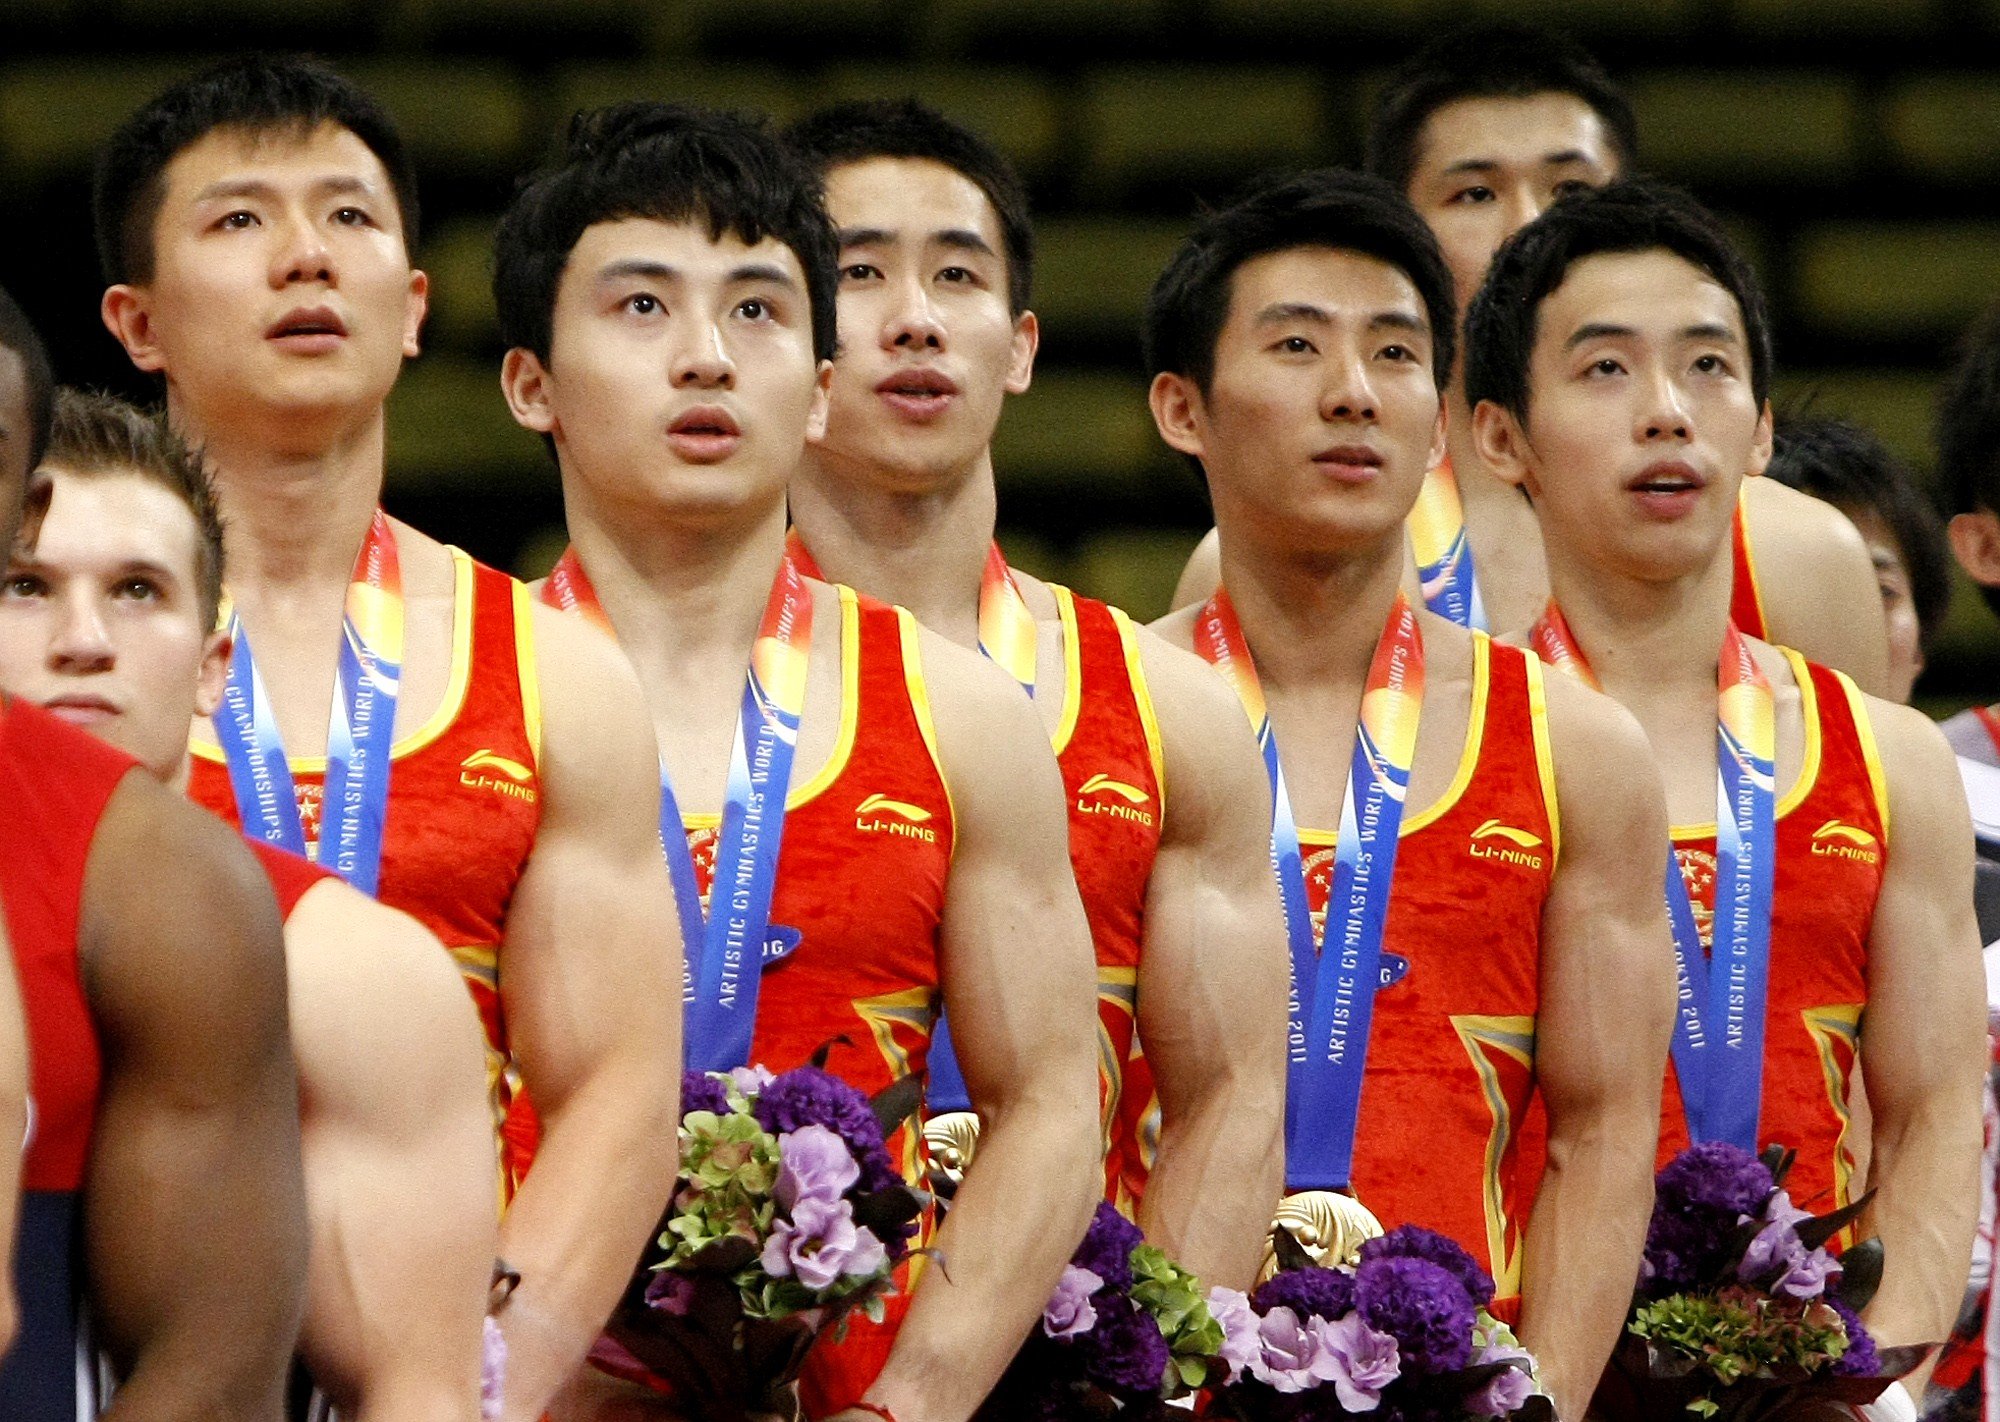 Chinese gymnasts sing along as the national anthem is played during the awards ceremony for the men’s team final at the Artistic Gymnastics World Championships in Tokyo in October 2011. Photo: AP